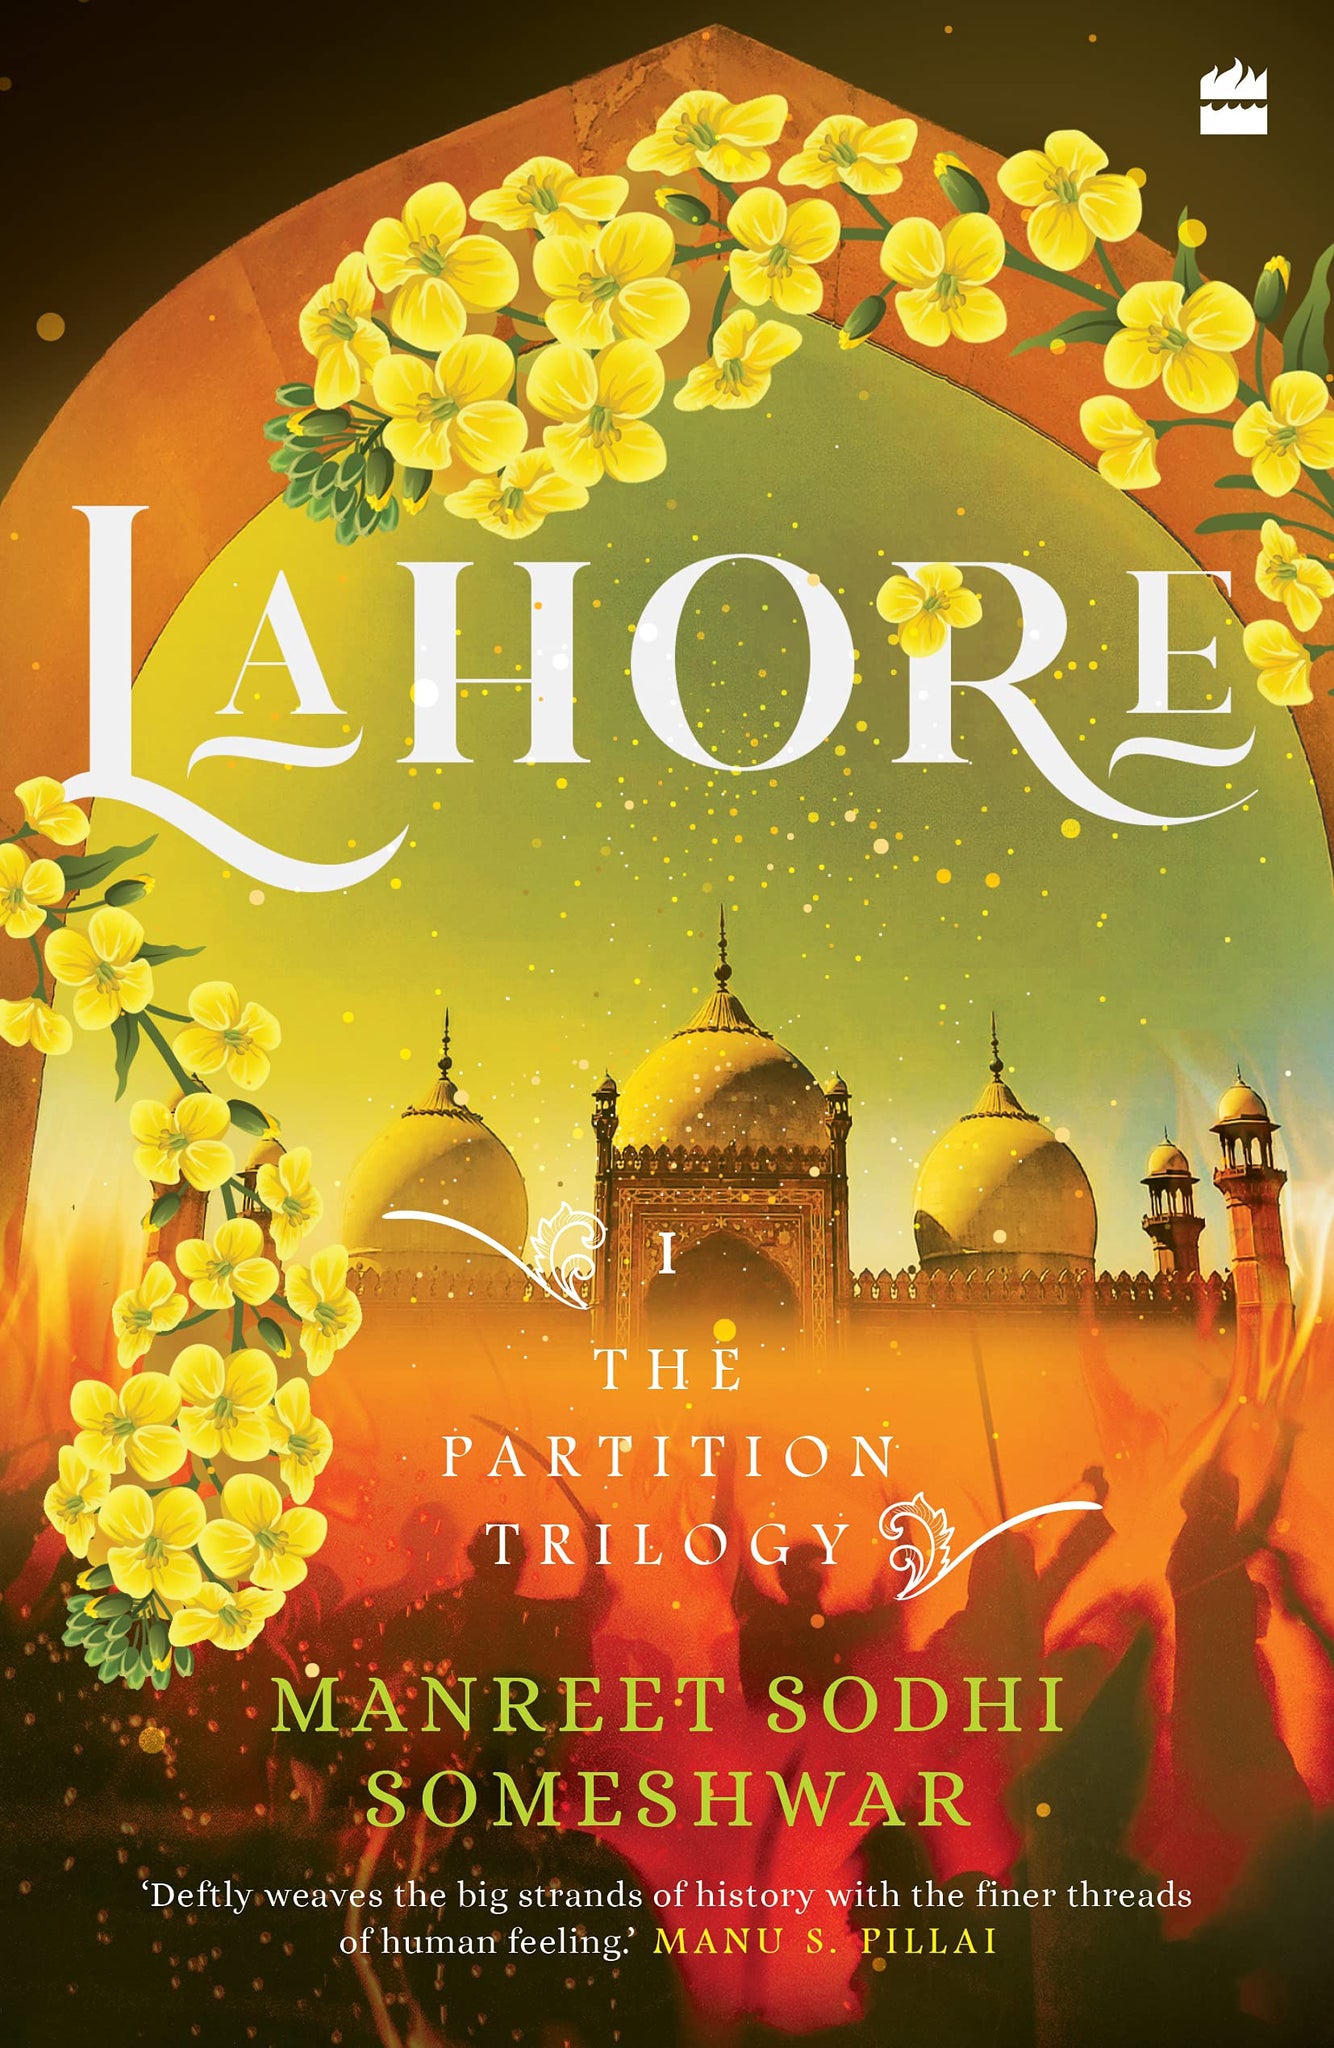 Lahore of The Partition Trilogy - Paperback